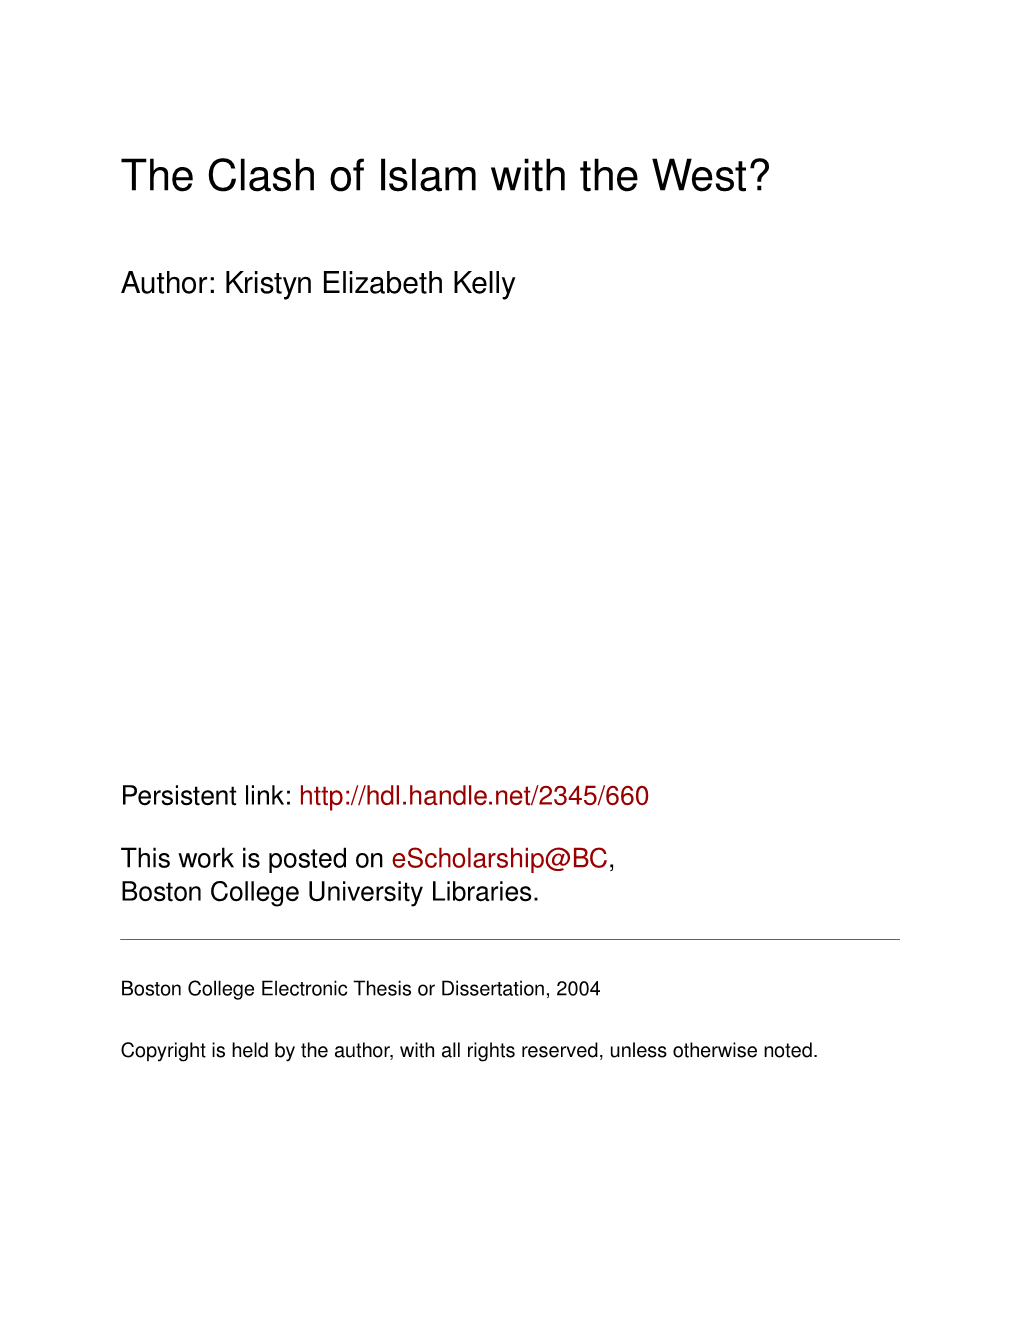 The Clash of Islam with the West?